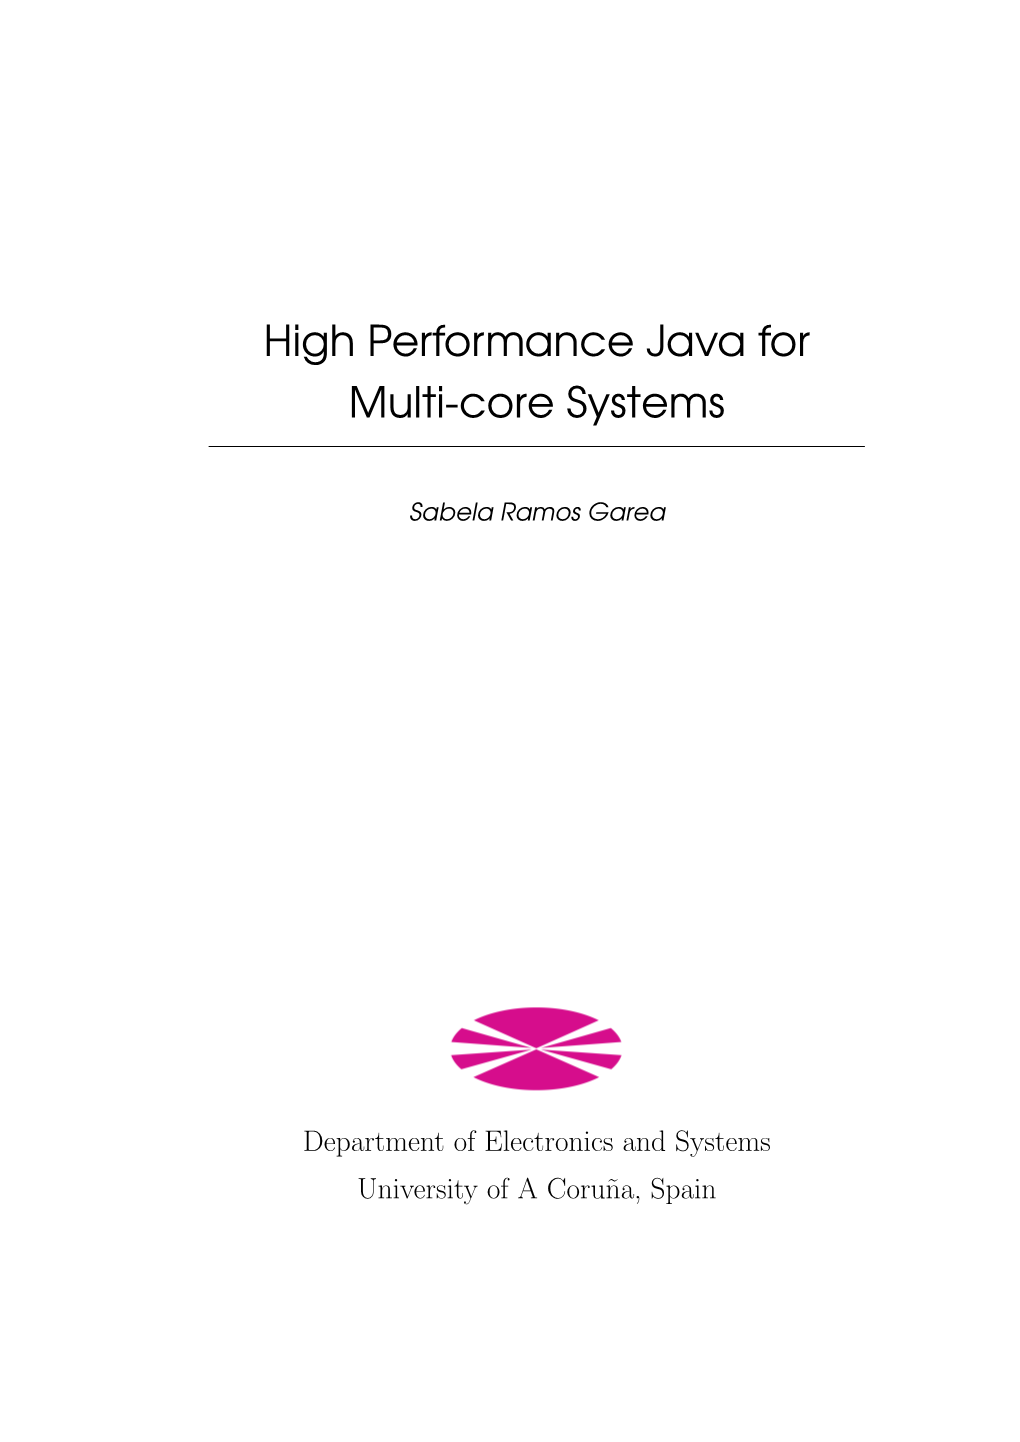 High Performance Java for Multi-Core Systems